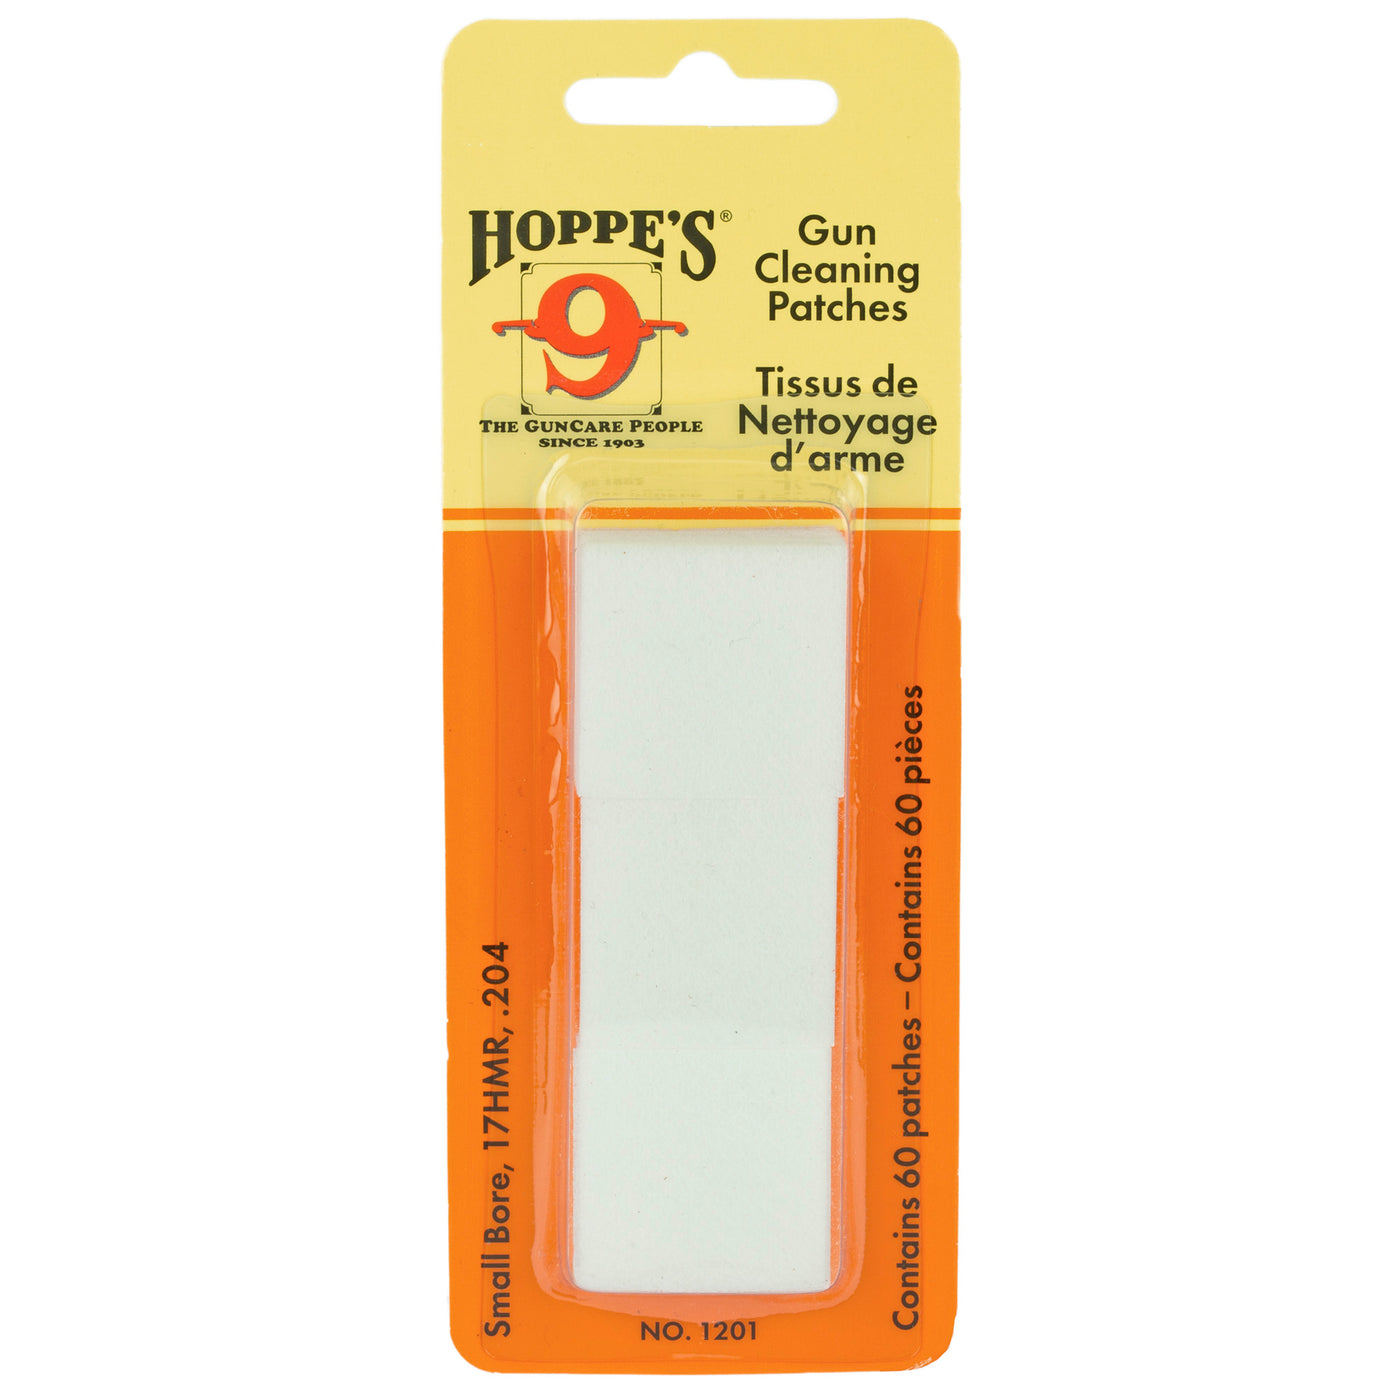 Hoppes Cleaning Patch #1 - .17 Caliber 60 Pack